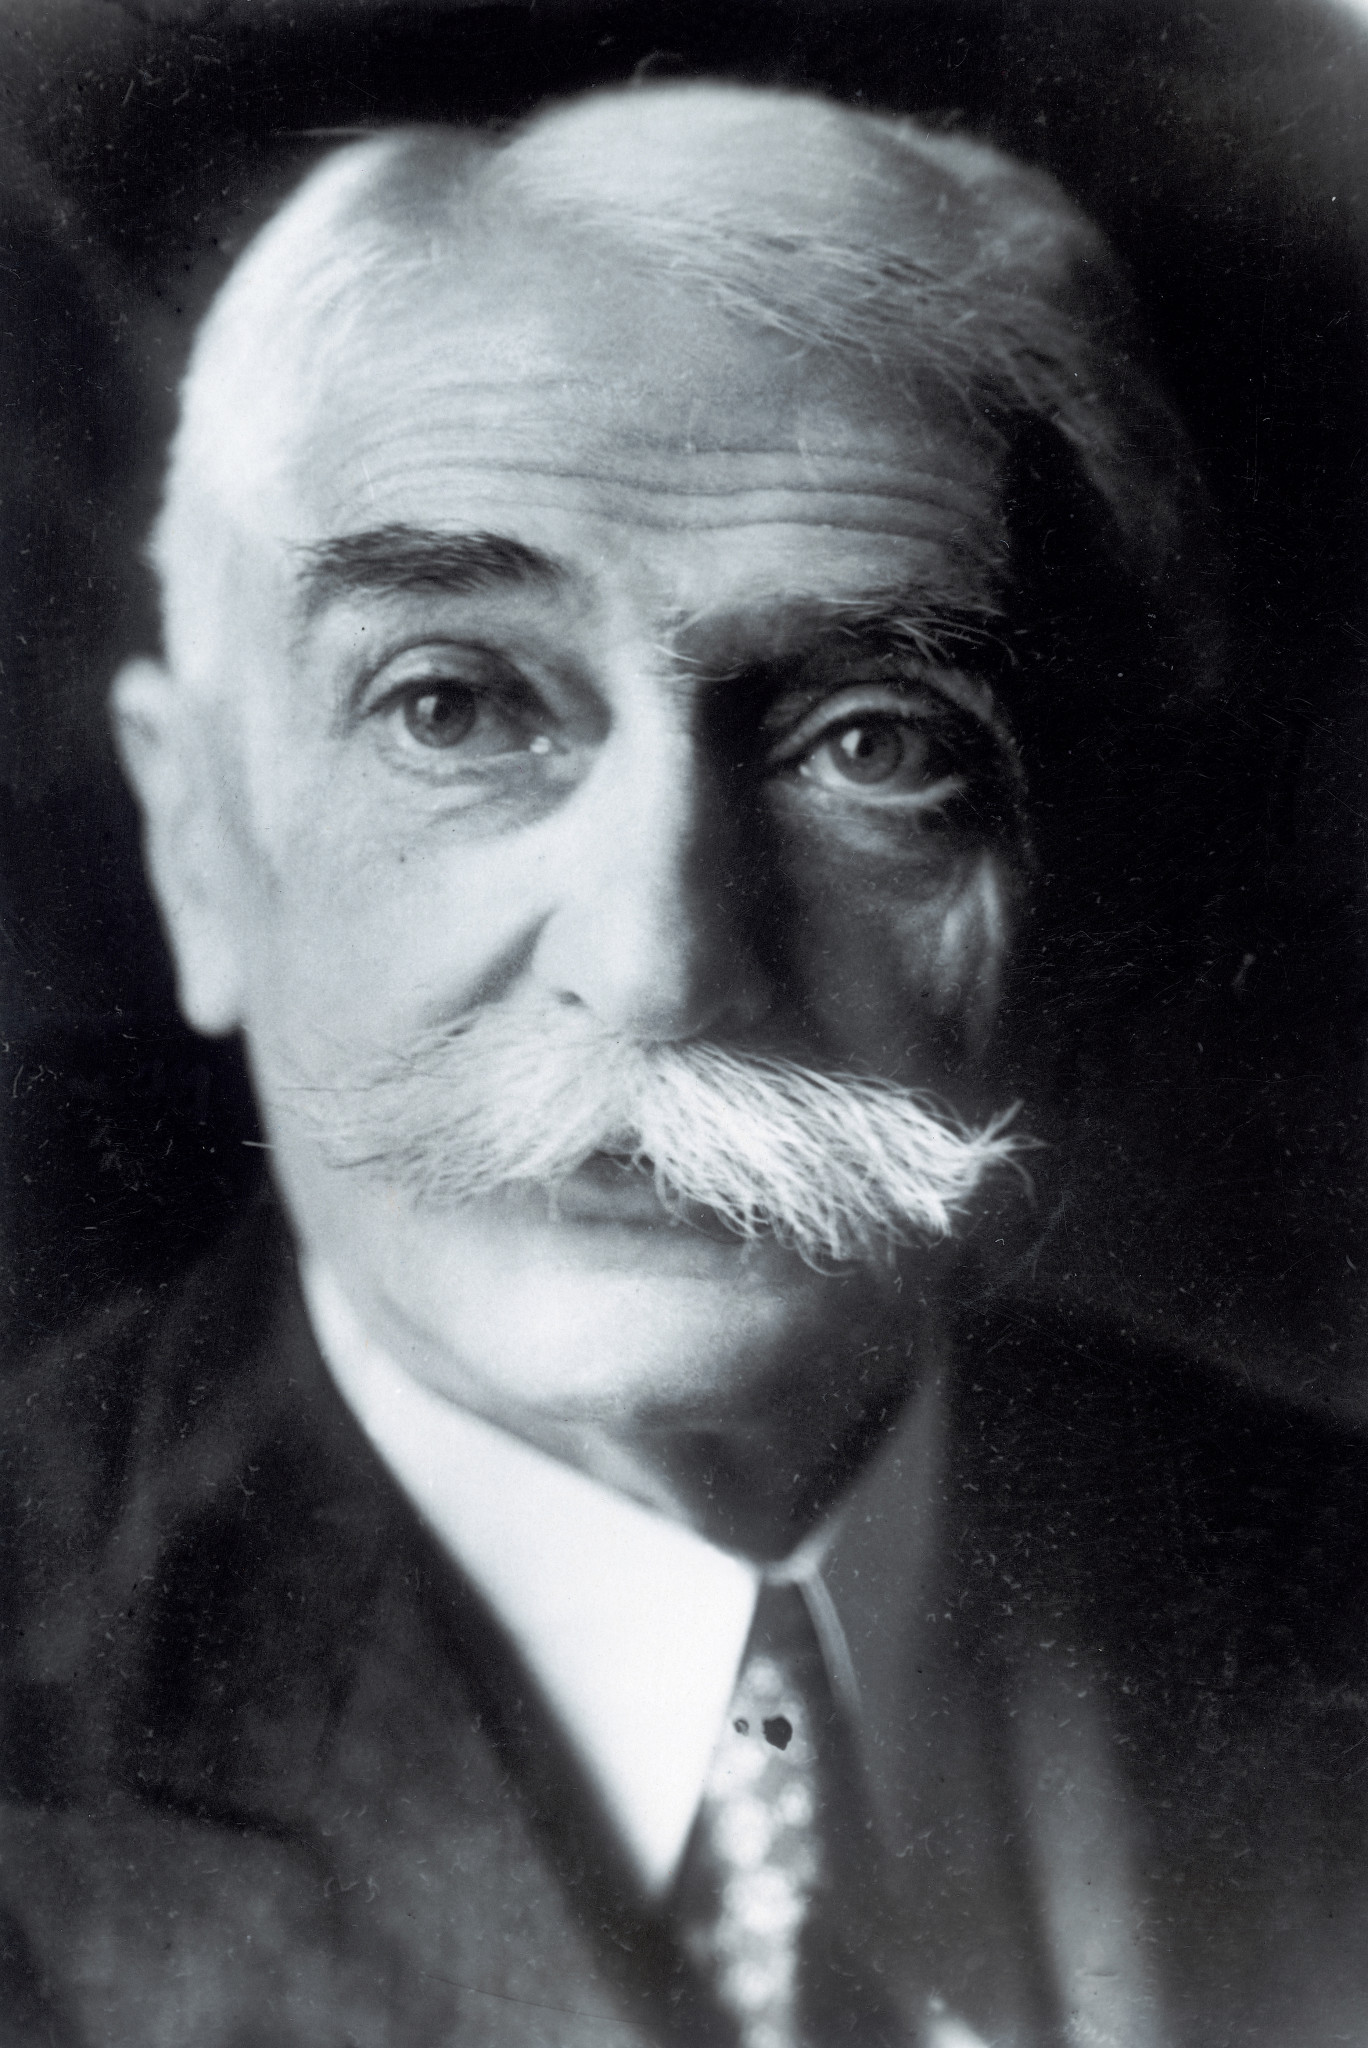 Baron Pierre De Coubertin, founder of the modern Games, envisaged the Olympic Torch increasing friendly understanding between nations ©Getty Images